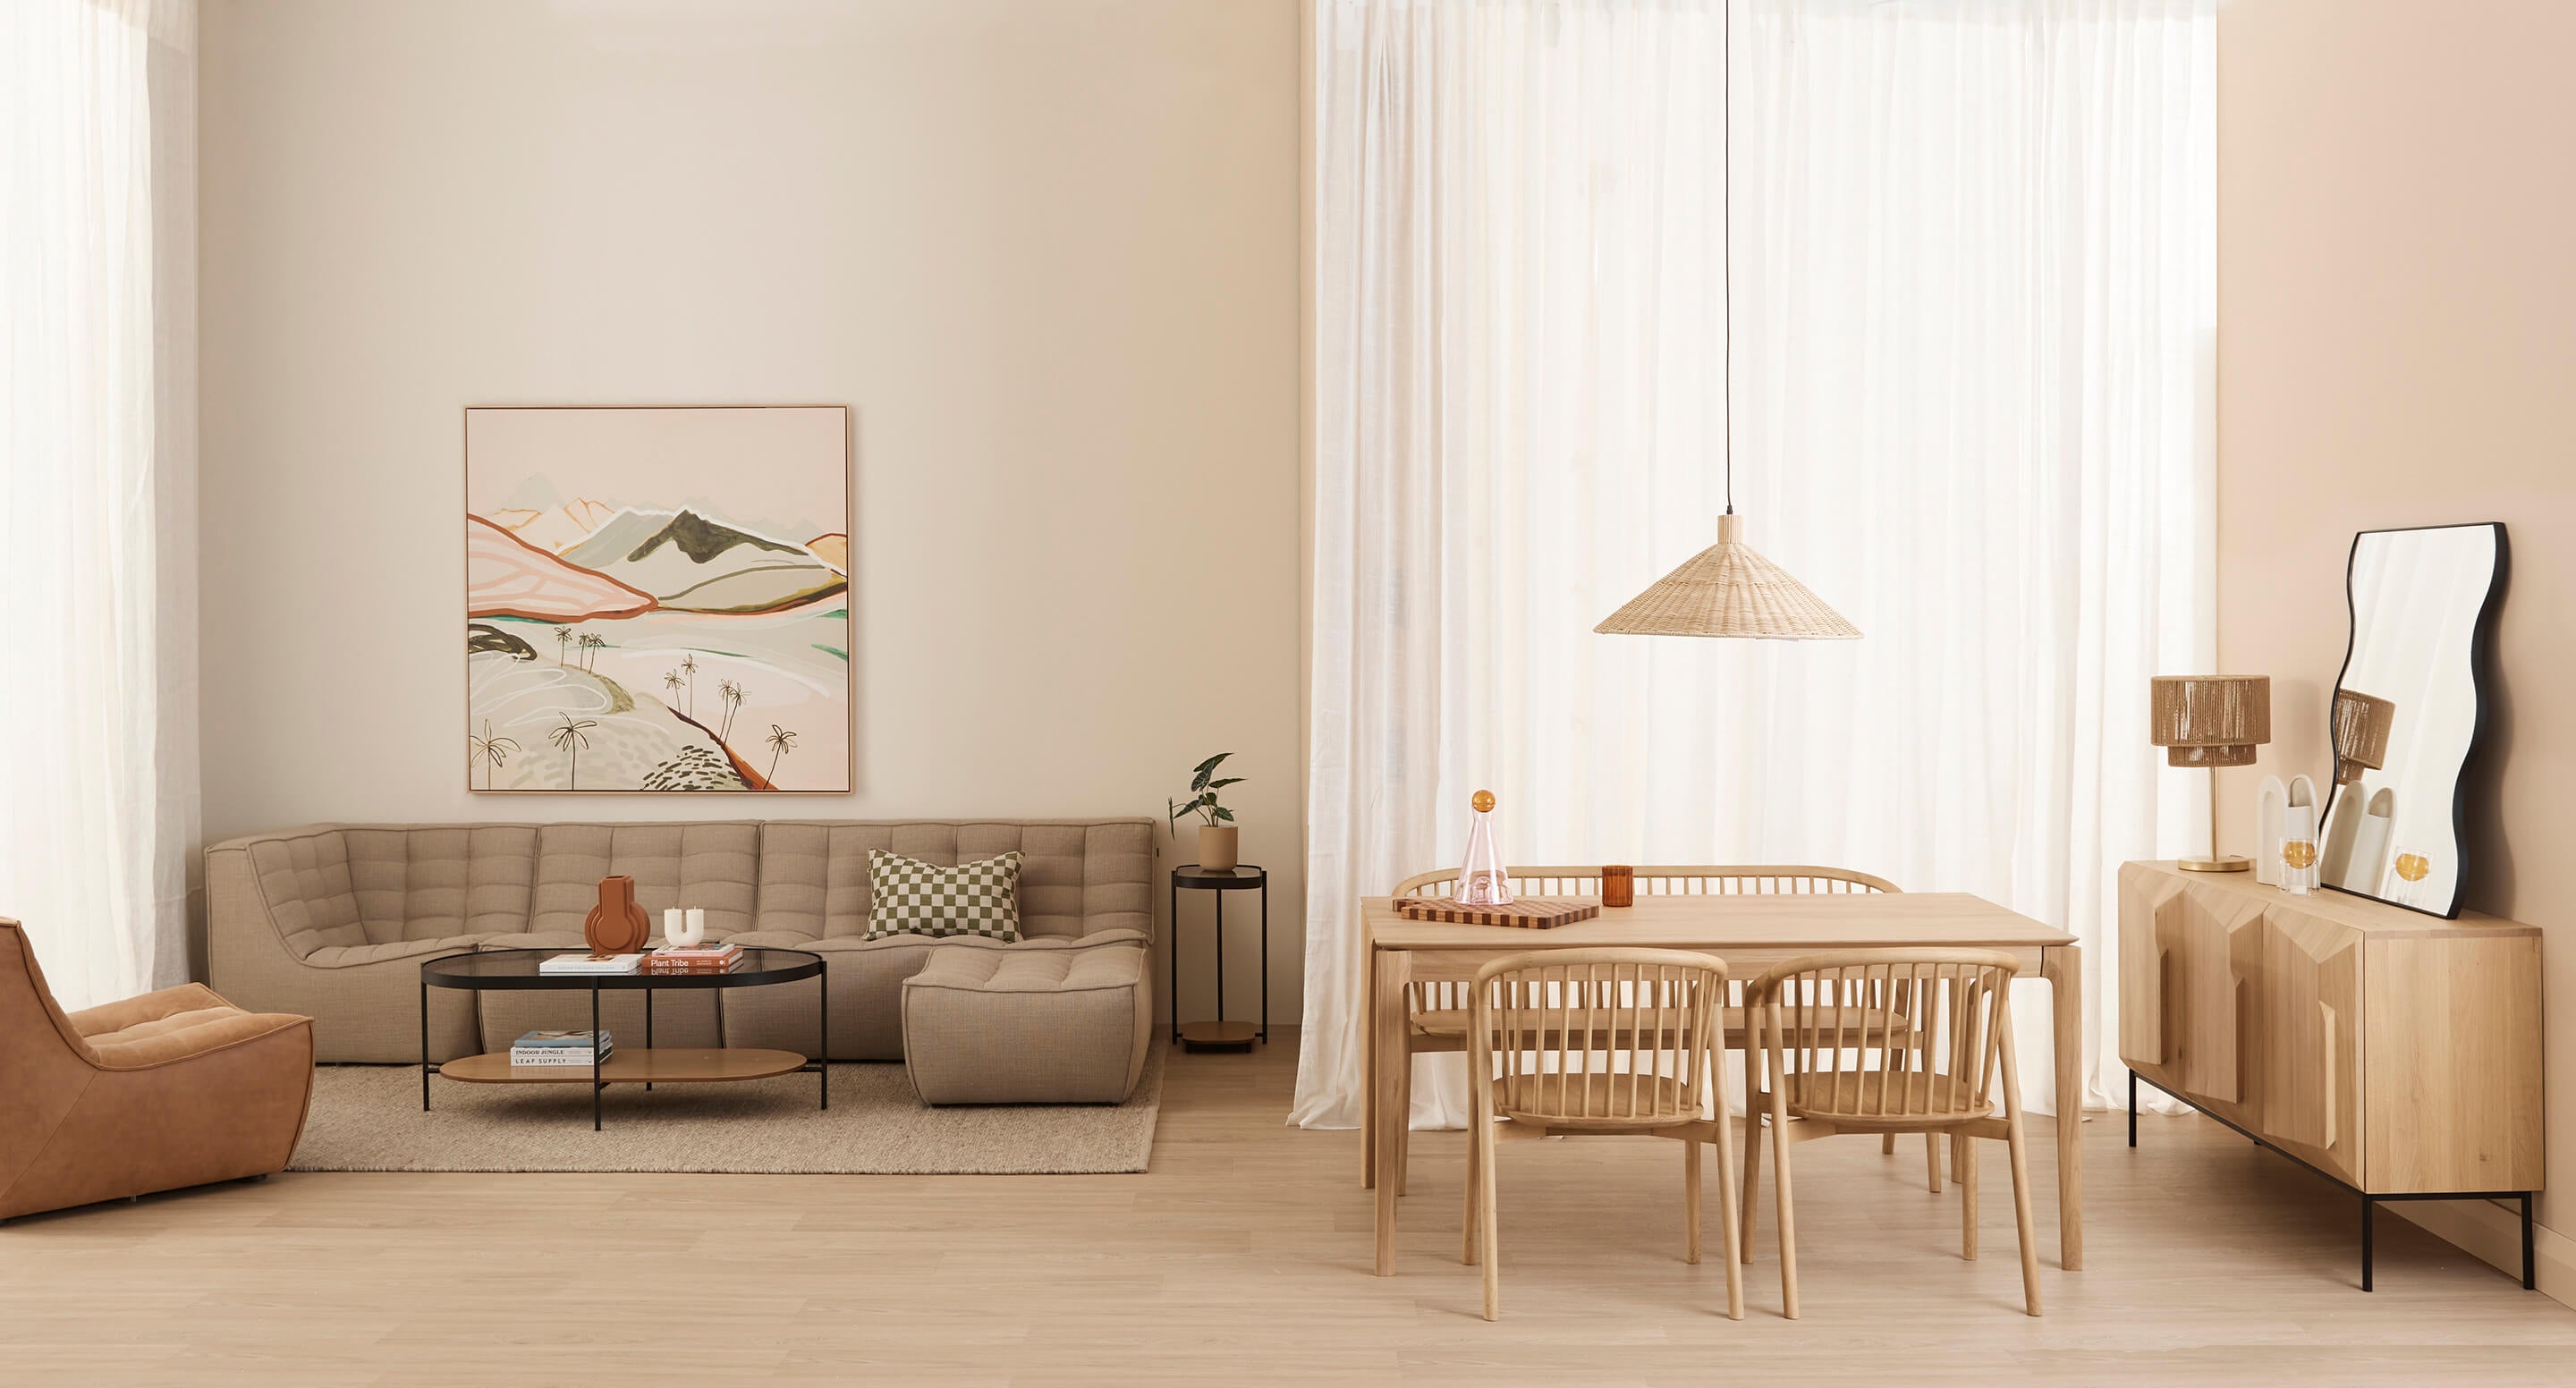 Introducing our Abode Spring Summer 22 collection, full of neutral yet fun living, dining, home office, and bedroom spaces. Shop the Tranquil living and dining collection online or in-store now!